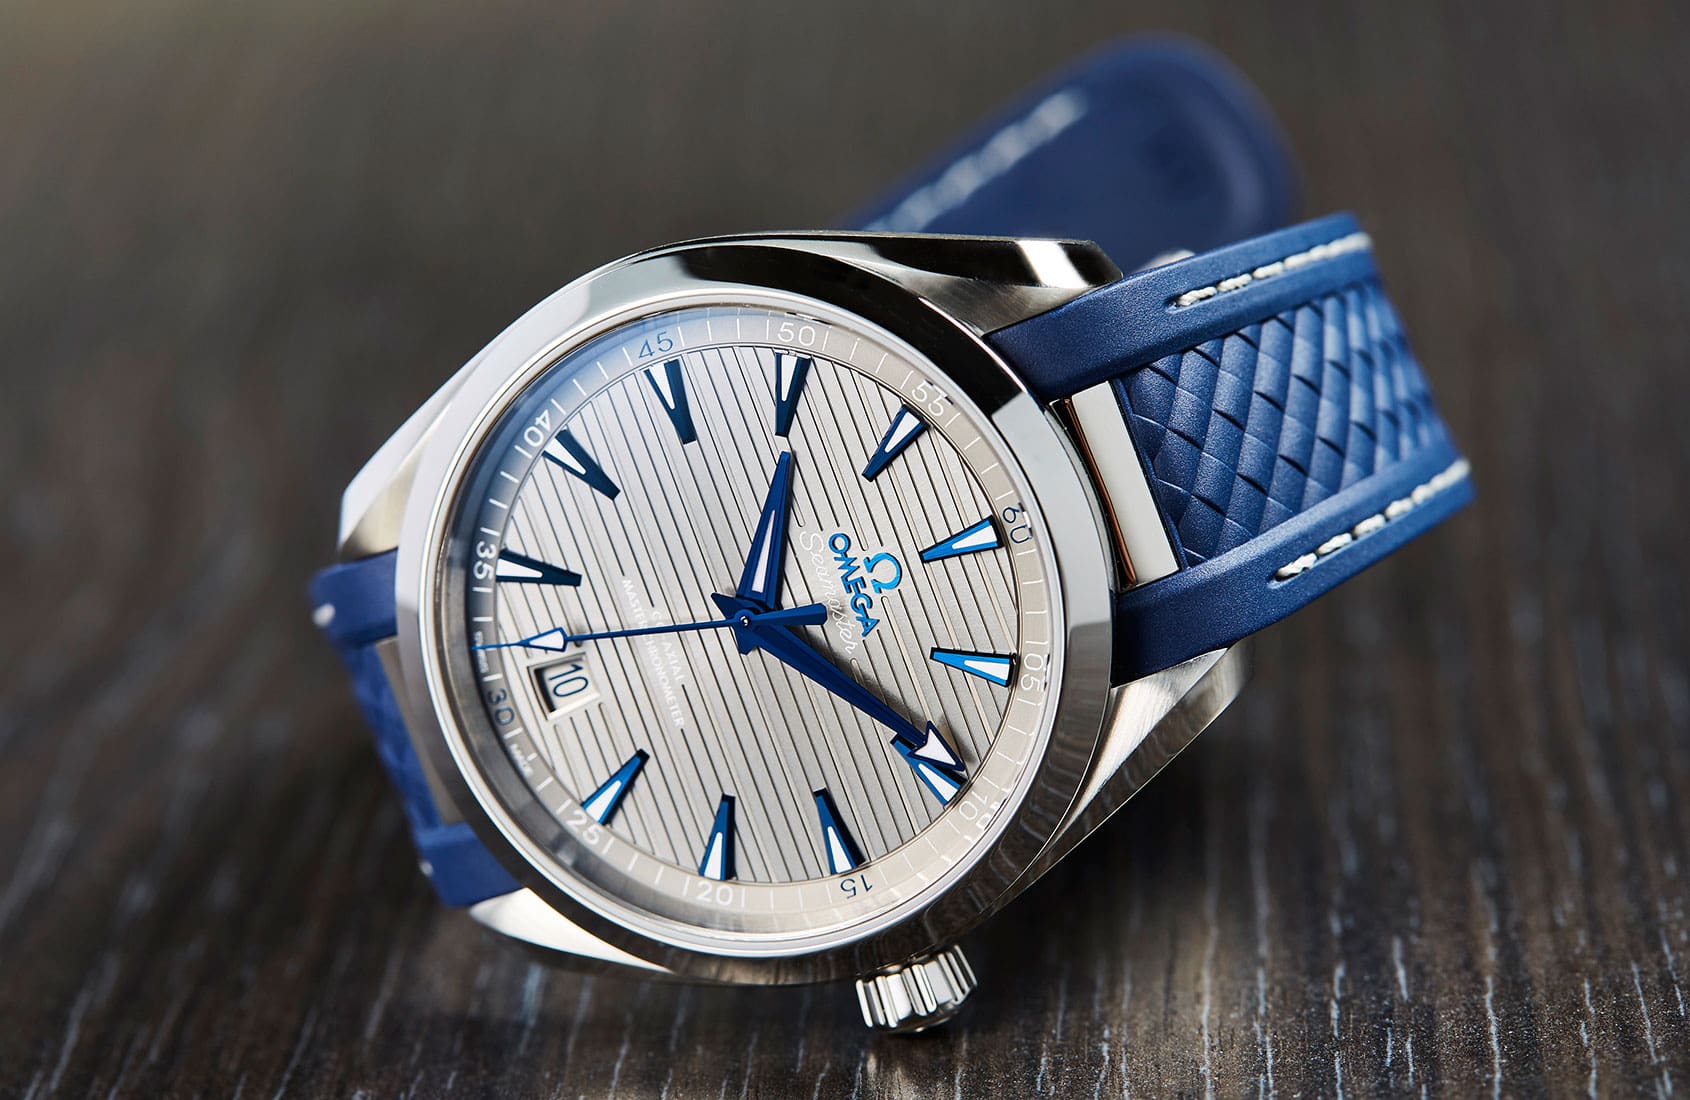 In the market for an Omega Aqua Terra? Watch this